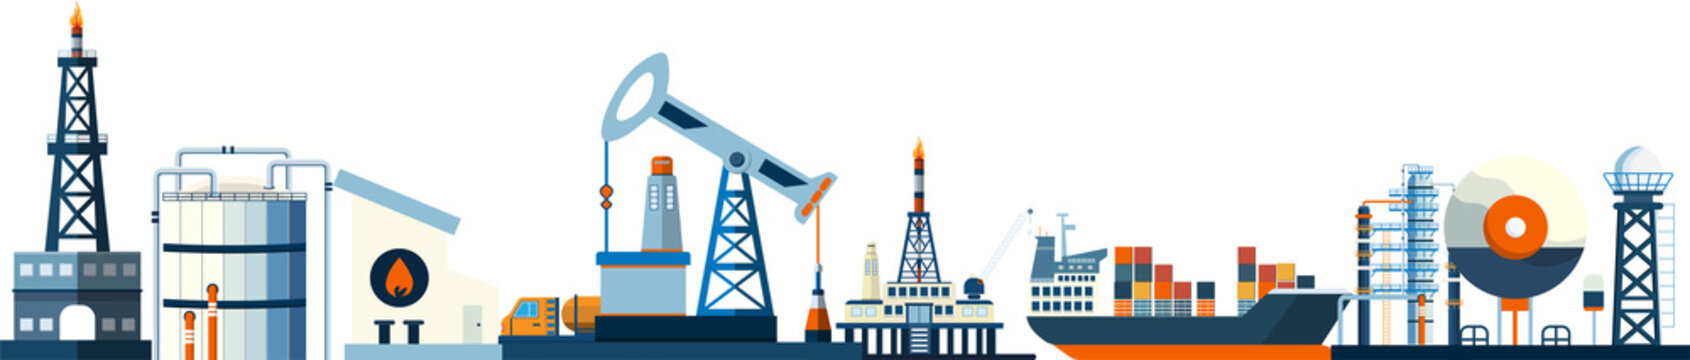 Gas and oil industry platform Banner with Outbuildings, Oil storage tank and more. Poster Brochure Flyer Design, Png Illustration